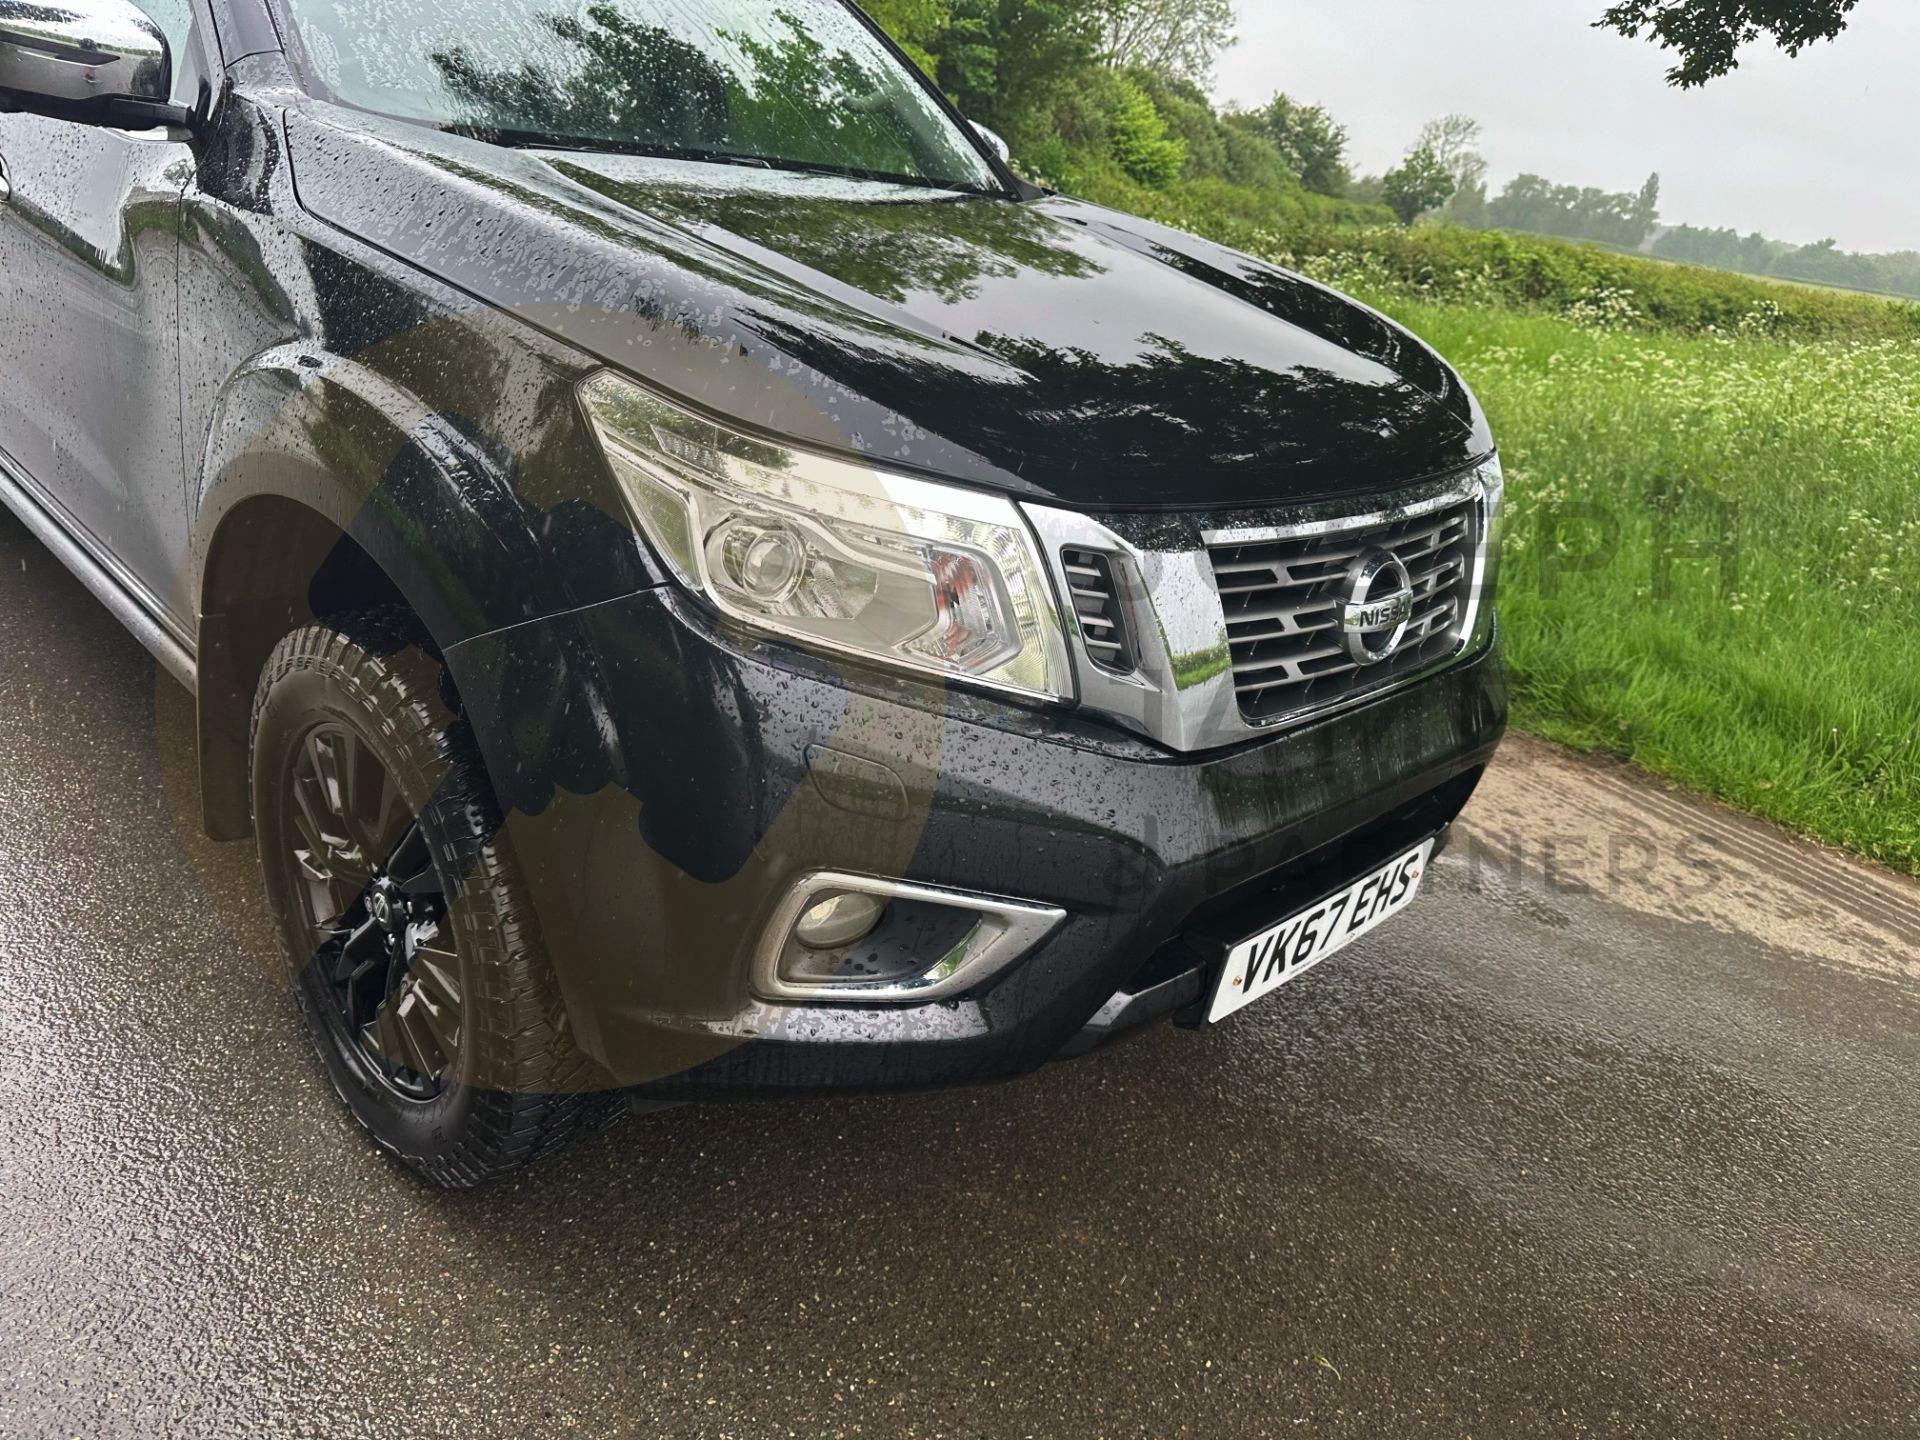 (ON SALE) NISSAN NAVARA *TREK-1 EDITION* DOUBLE CAB PICK-UP (2018 - EURO 6) 2.3 DCI - AUTOMATIC - Image 18 of 52